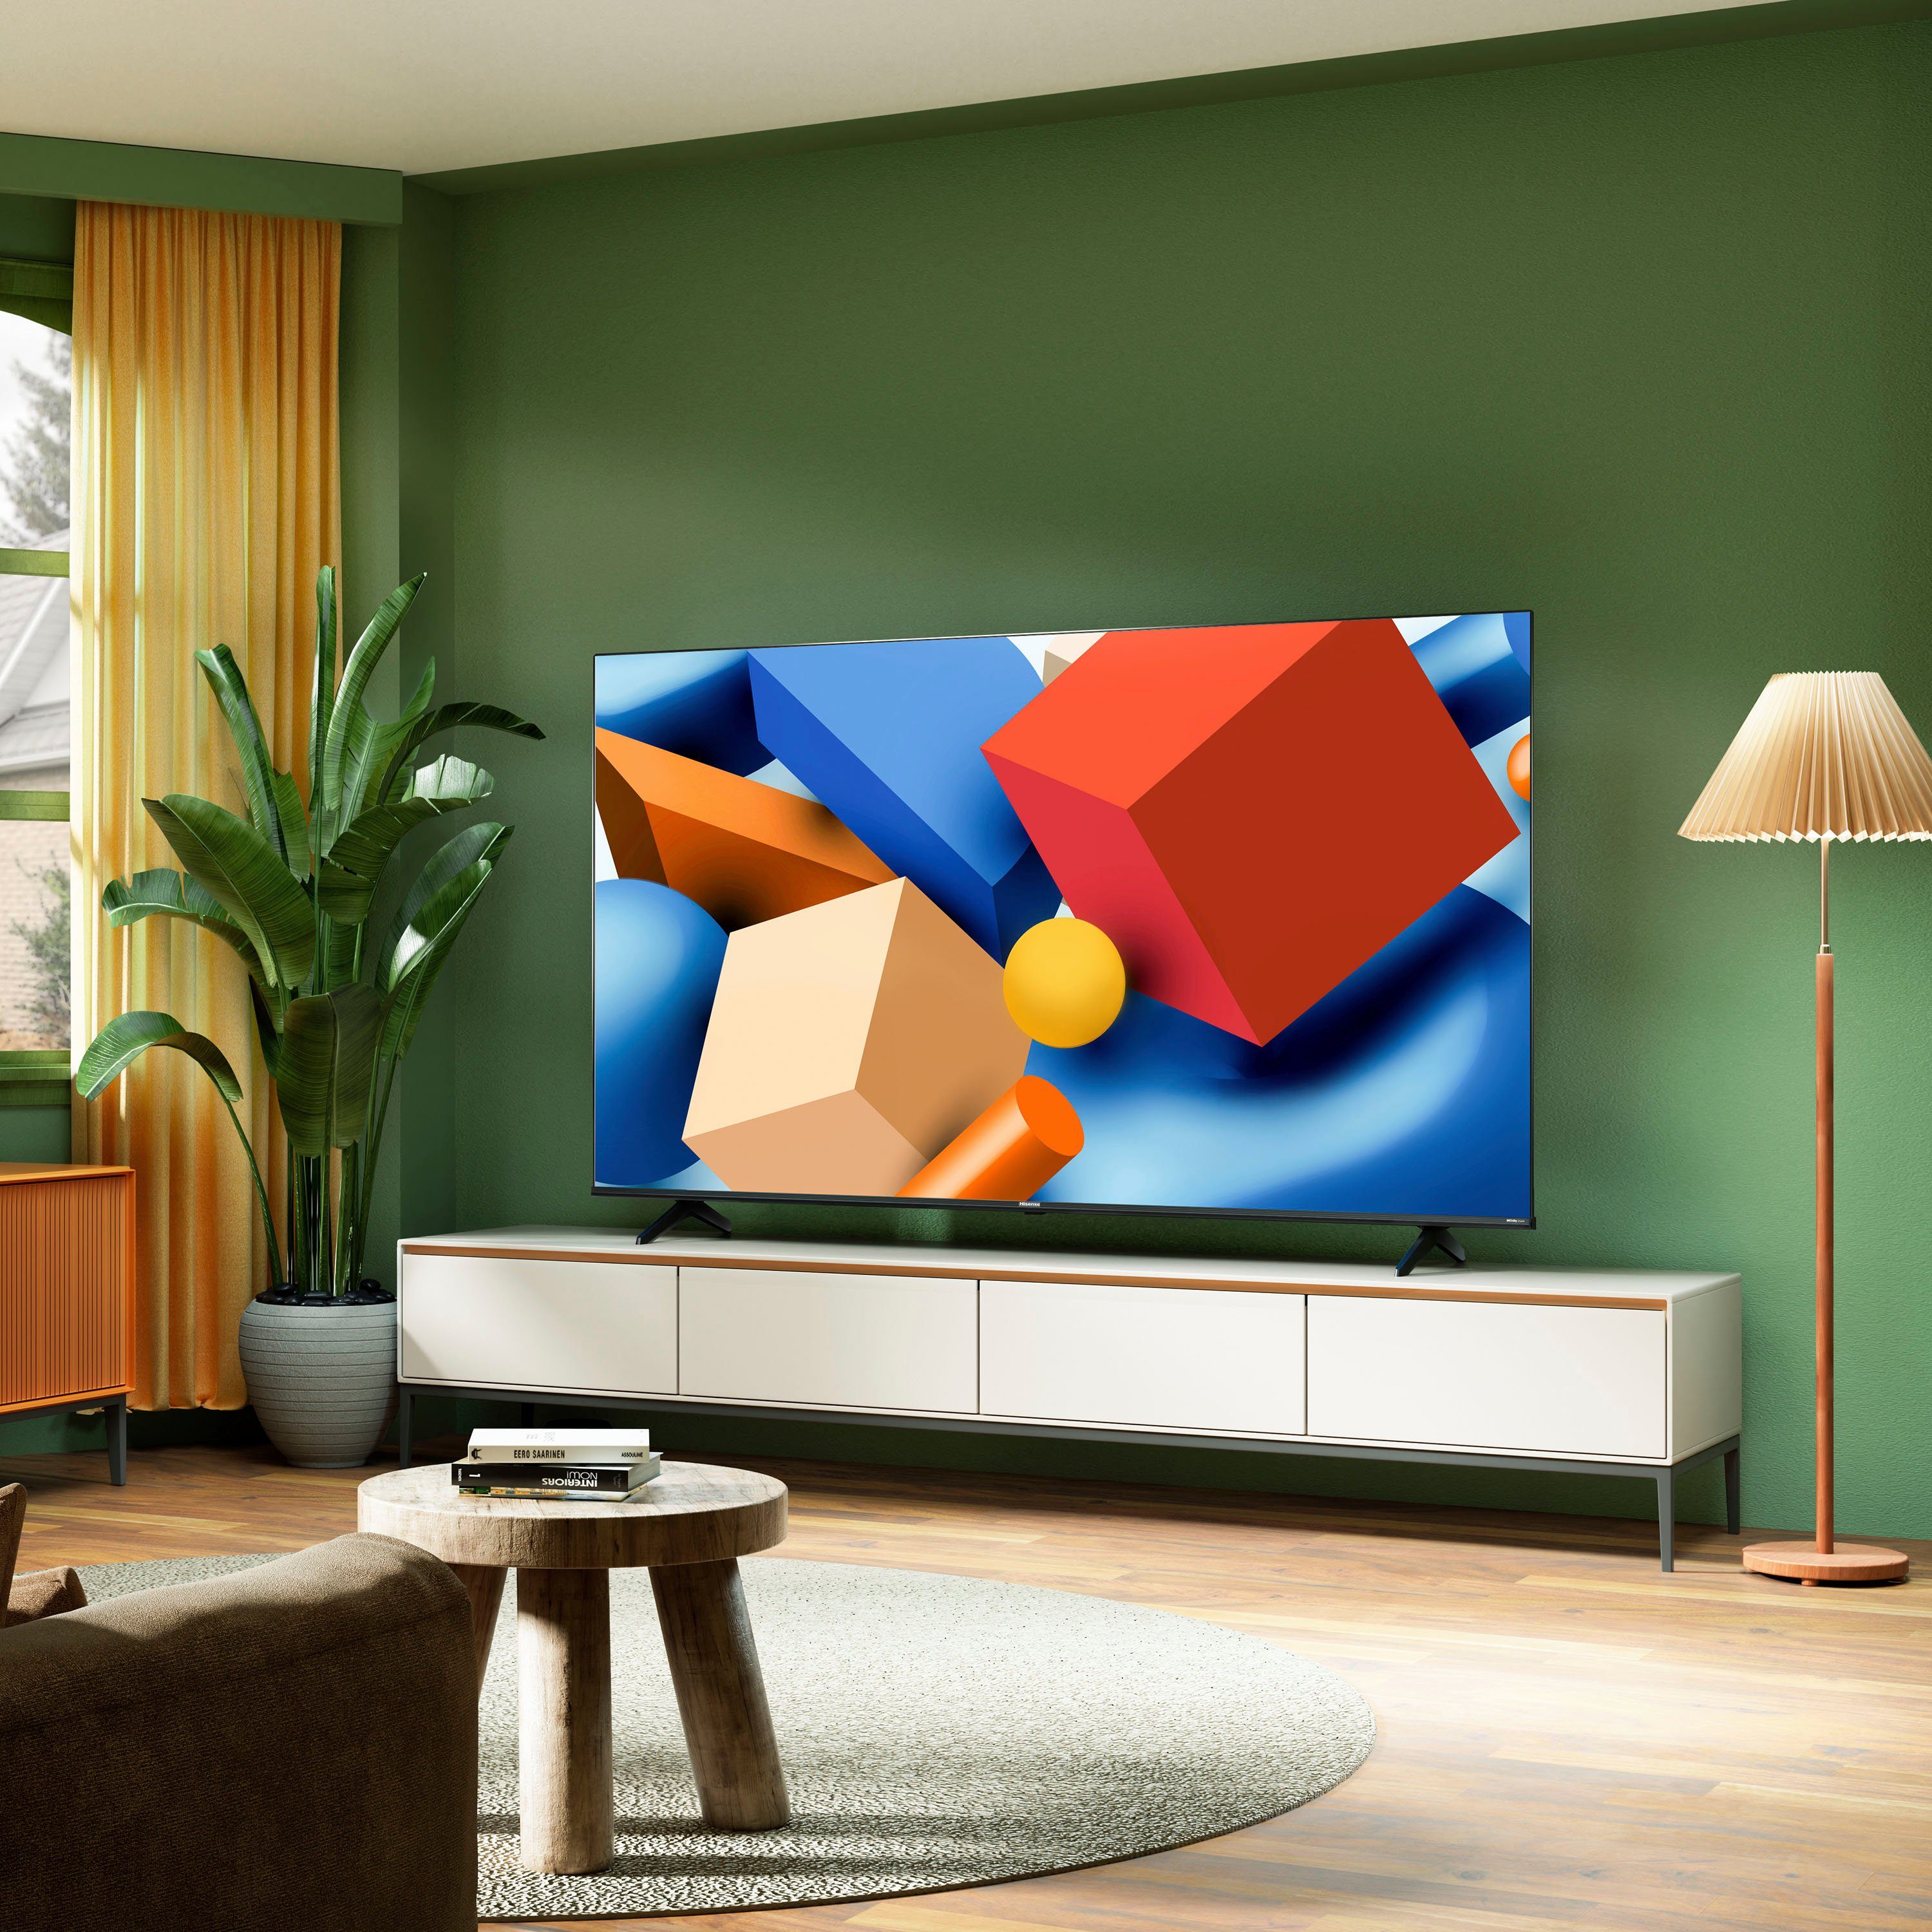 Hisense 65E61KT HD, 4K cm/65 Triple Smart-TV, DVB-C/S/S2/T/T2) Vision, Ultra (164 LED-Fernseher Smart-TV, Dolby Zoll, Tuner